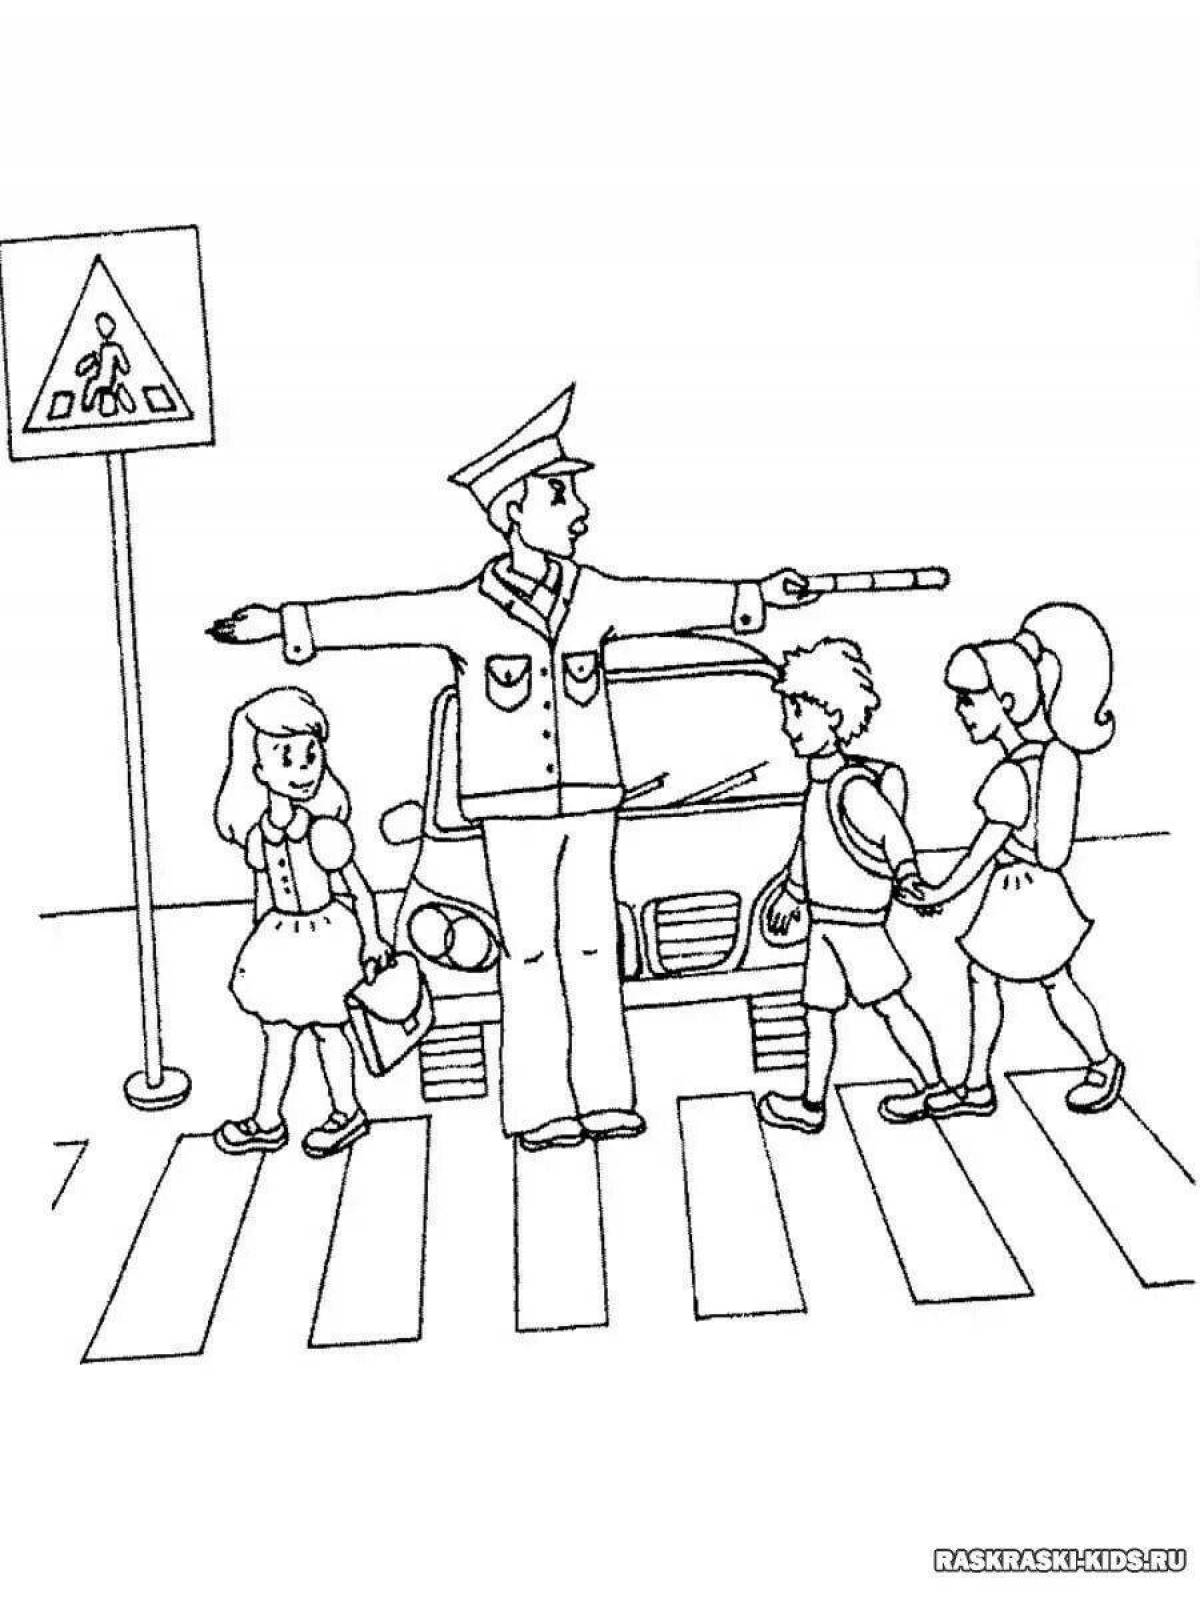 Comic traffic safety coloring page